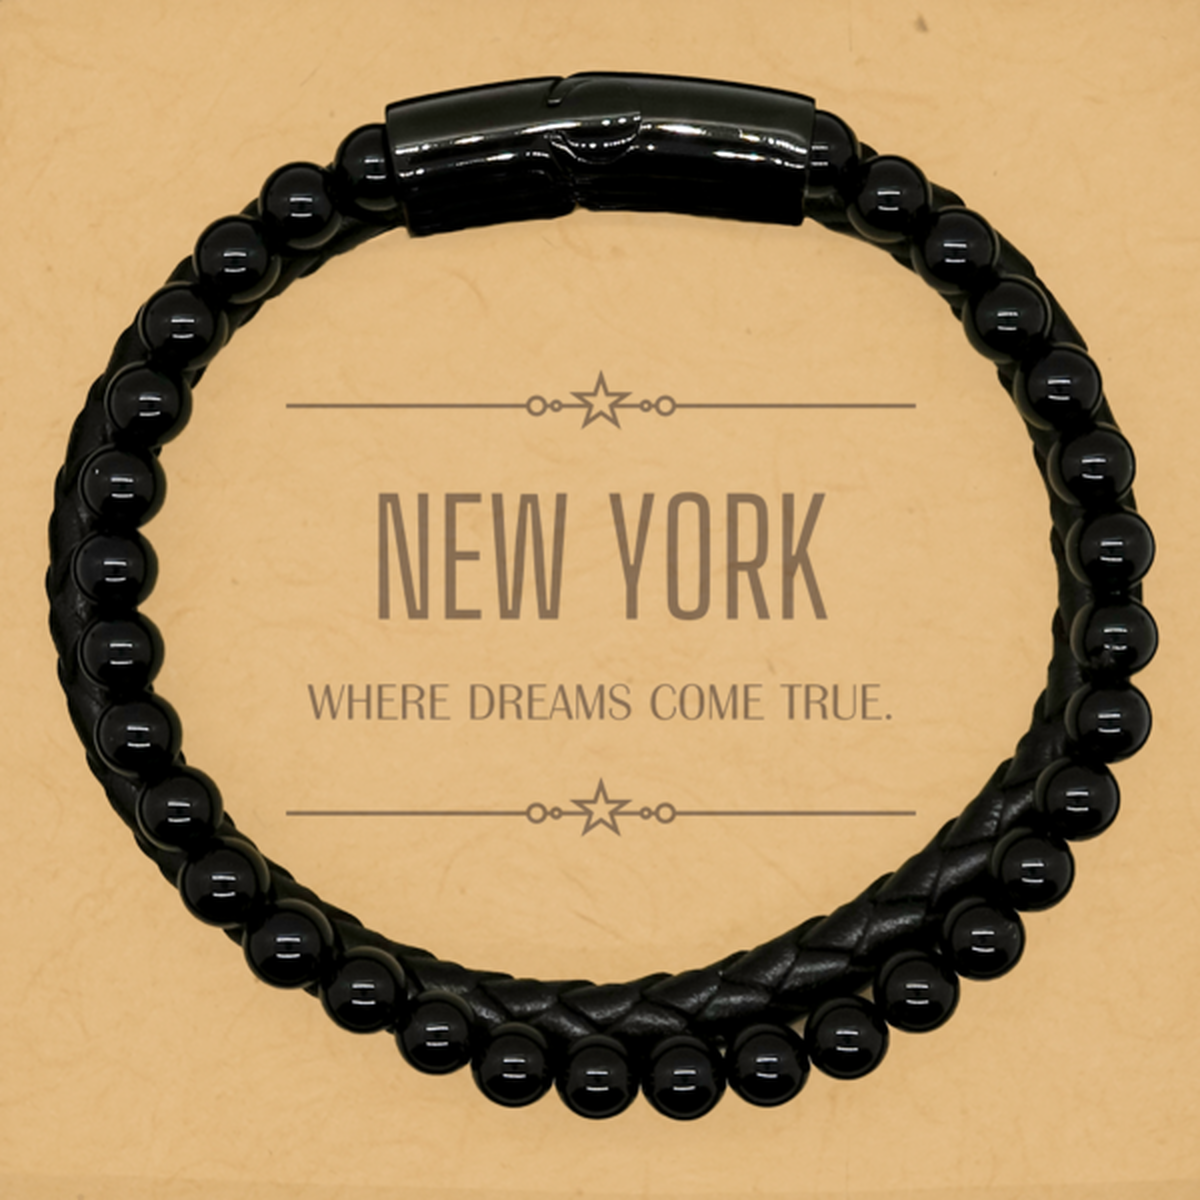 Love New York State Stone Leather Bracelets, New York Where dreams come true, Birthday Inspirational Gifts For New York Men, Women, Friends